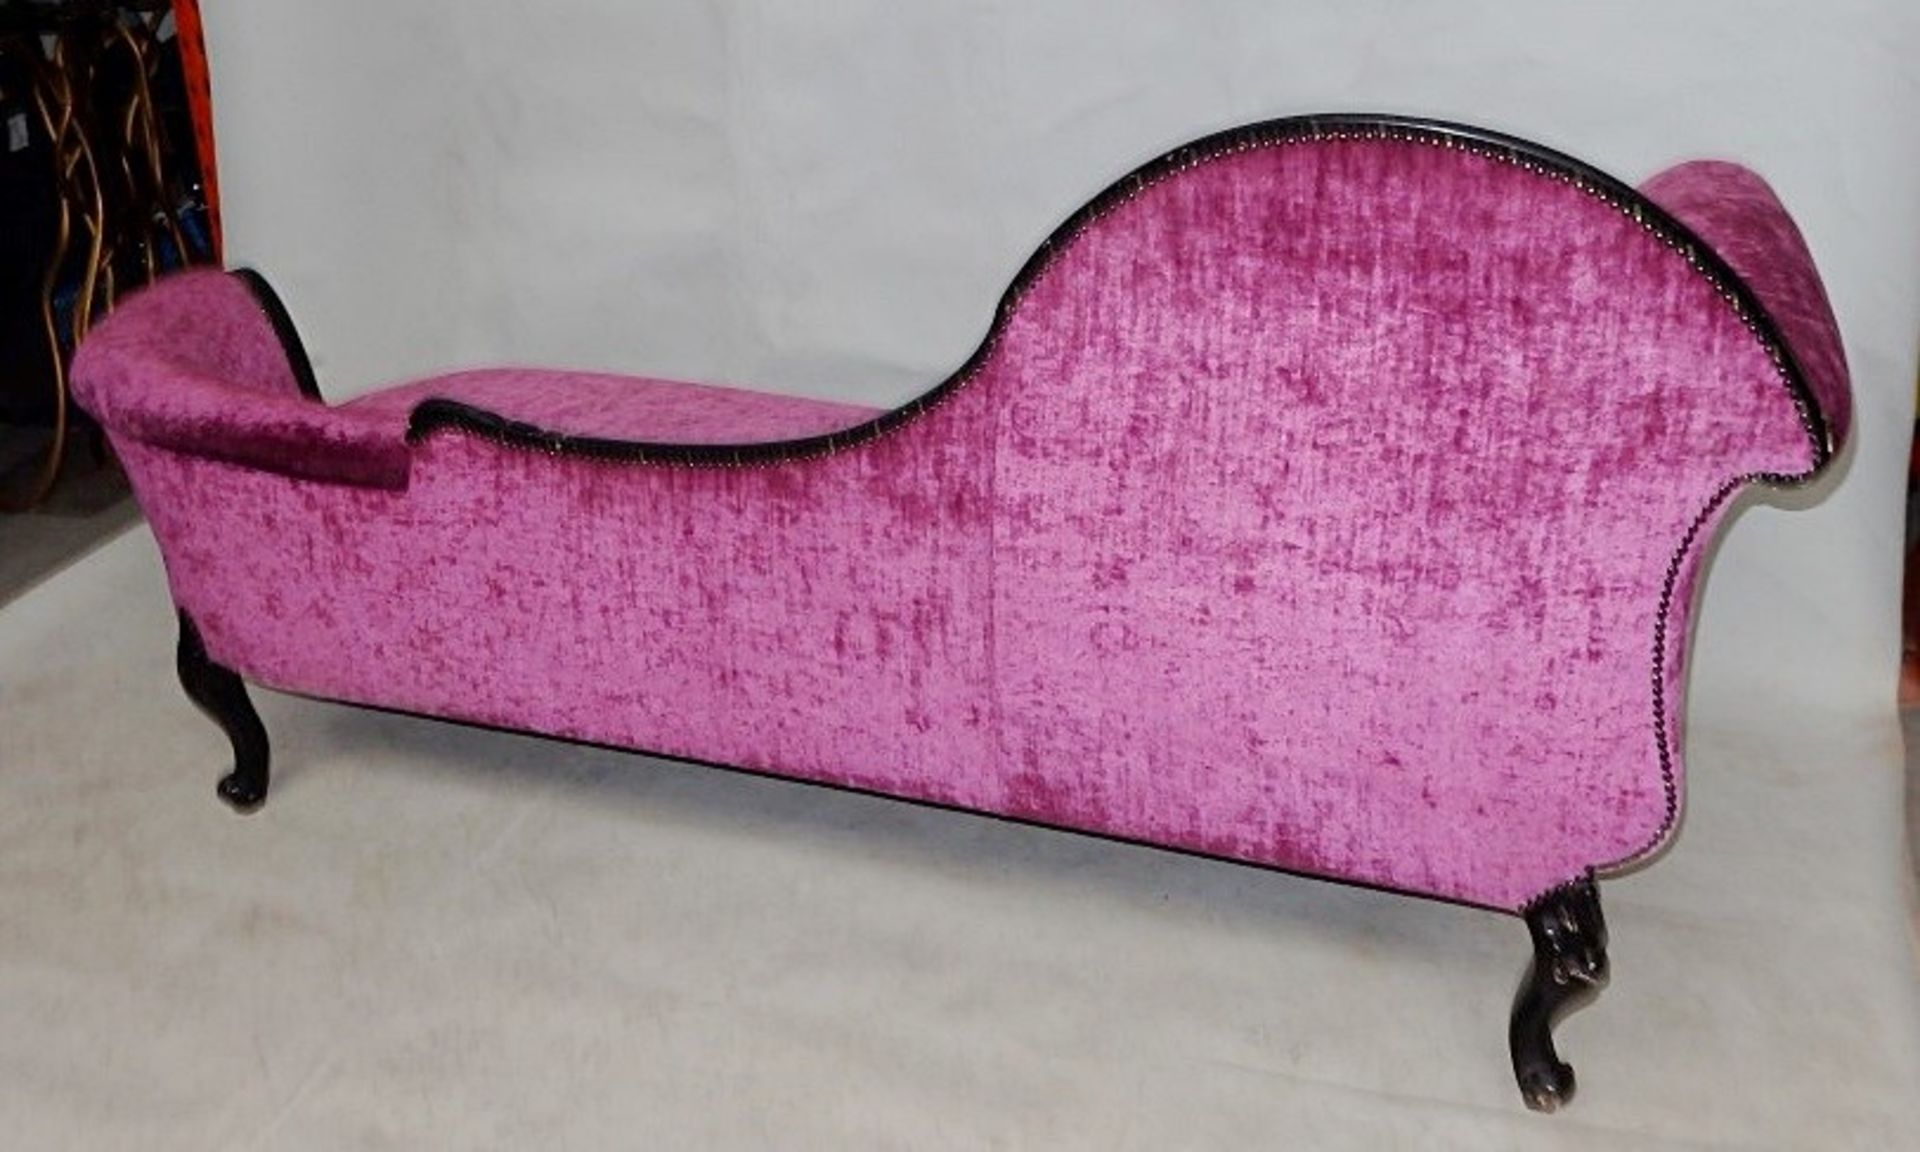 1 x Luxury French Inspired Chais - Colour Black Painted Frame With Magenta Chenille Upholstery - - Image 8 of 12